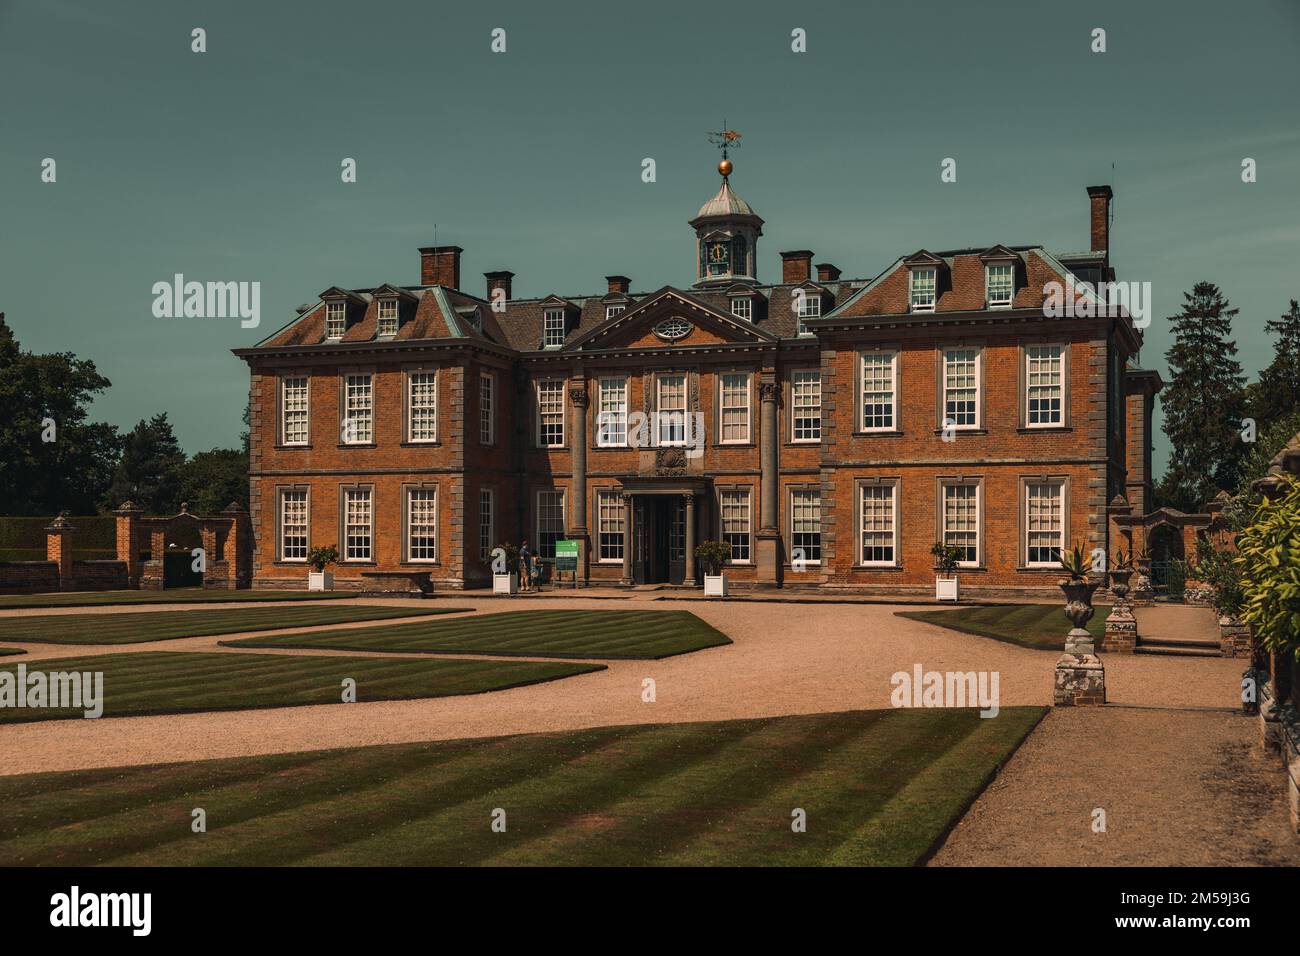 The Hanbury Hall 18th-century stately home in Hanbury, Worcestershire, England Stock Photo